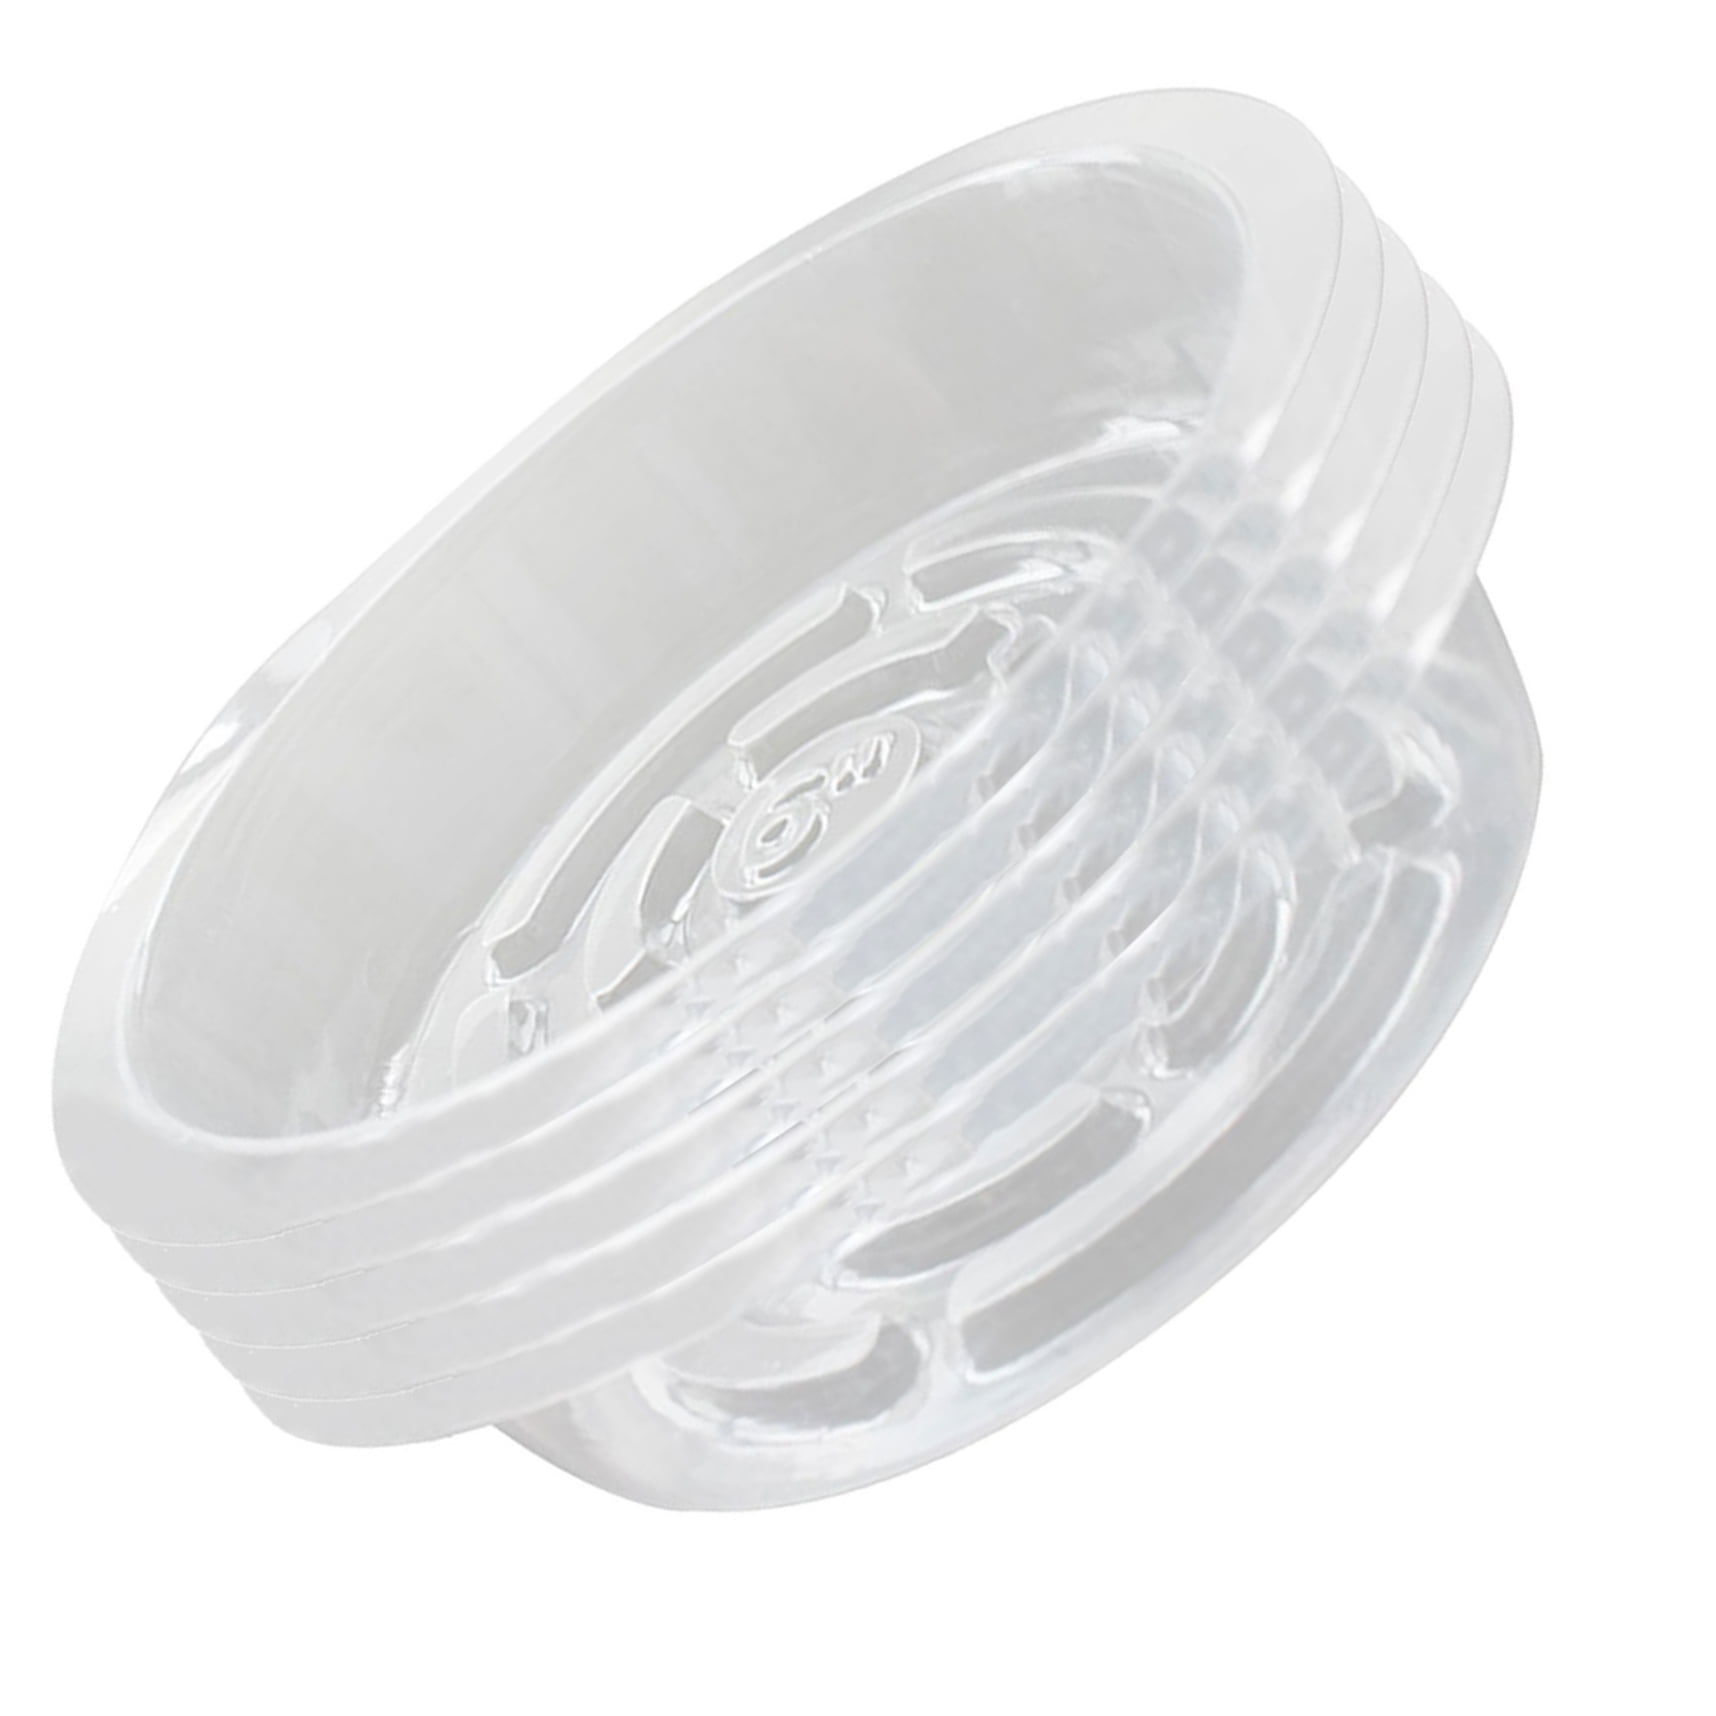 5 Pack Clear Plastic Plant Saucer Drip Trays for Indoors Outdoors, 6 in ...